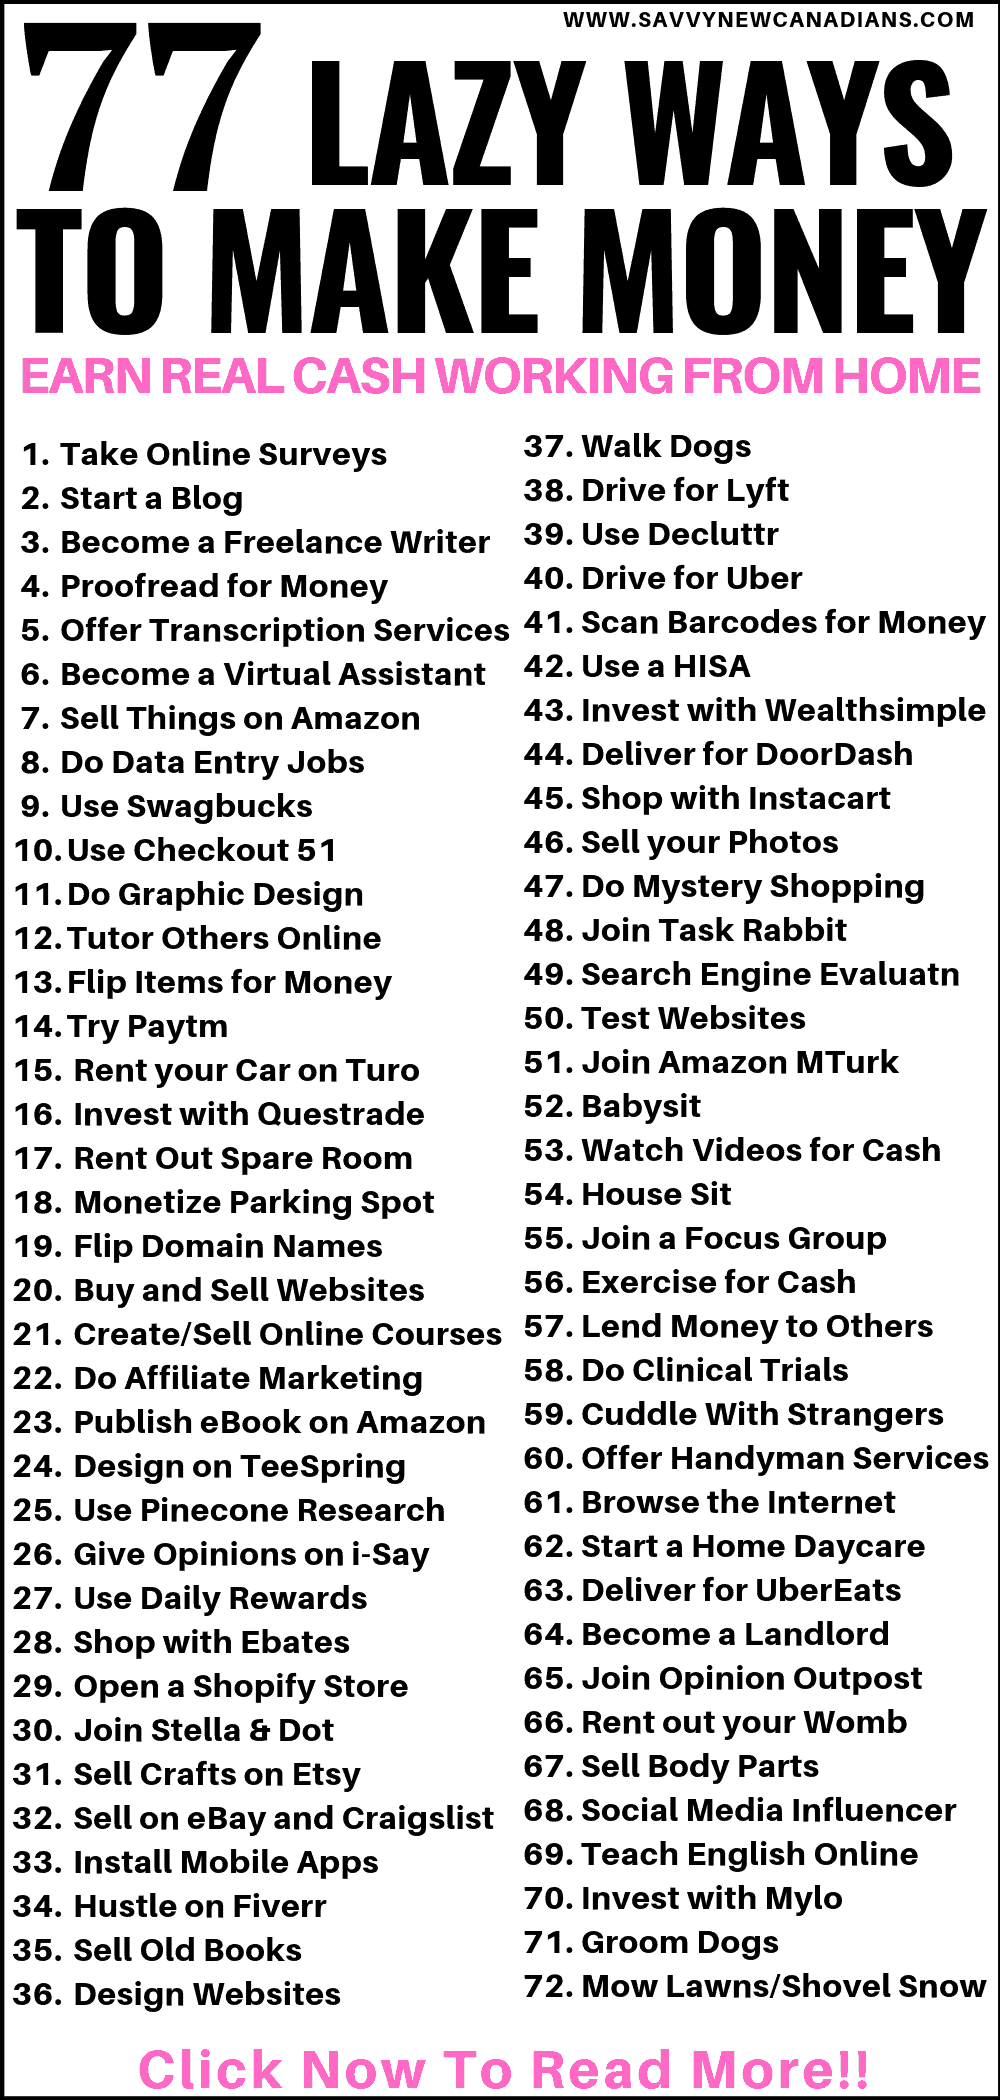 Looking for legit work from home jobs to make money? Here's a quick list of stay at home jobs that pay up to $5,000 per month. No previous experience required! #workfromhome #workfromhomejobs #sidehustles #moneymakingideas #makeextracash #makemoneyonline